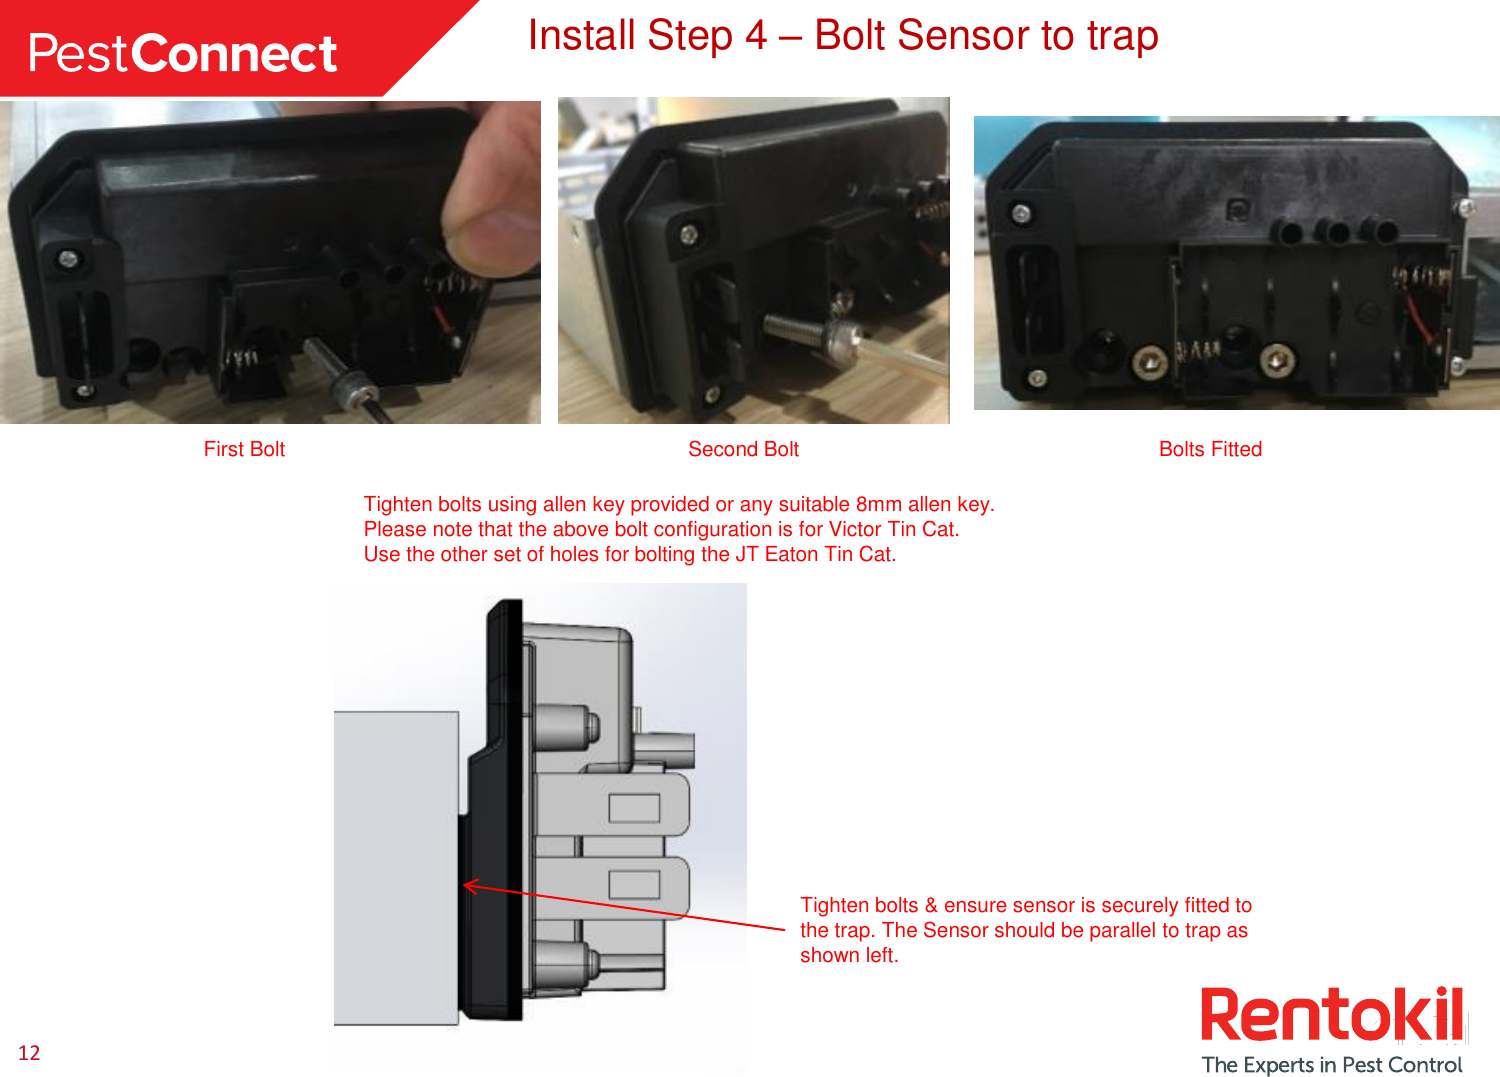 12Install Step 4 –Bolt Sensor to trapBolts FittedTighten bolts using allen key provided or any suitable 8mm allen key.Please note that the above bolt configuration is for Victor Tin Cat.Use the other set of holes for bolting the JT Eaton Tin Cat. Tighten bolts &amp; ensure sensor is securely fitted to the trap. The Sensor should be parallel to trap as shown left.Second BoltFirst Bolt